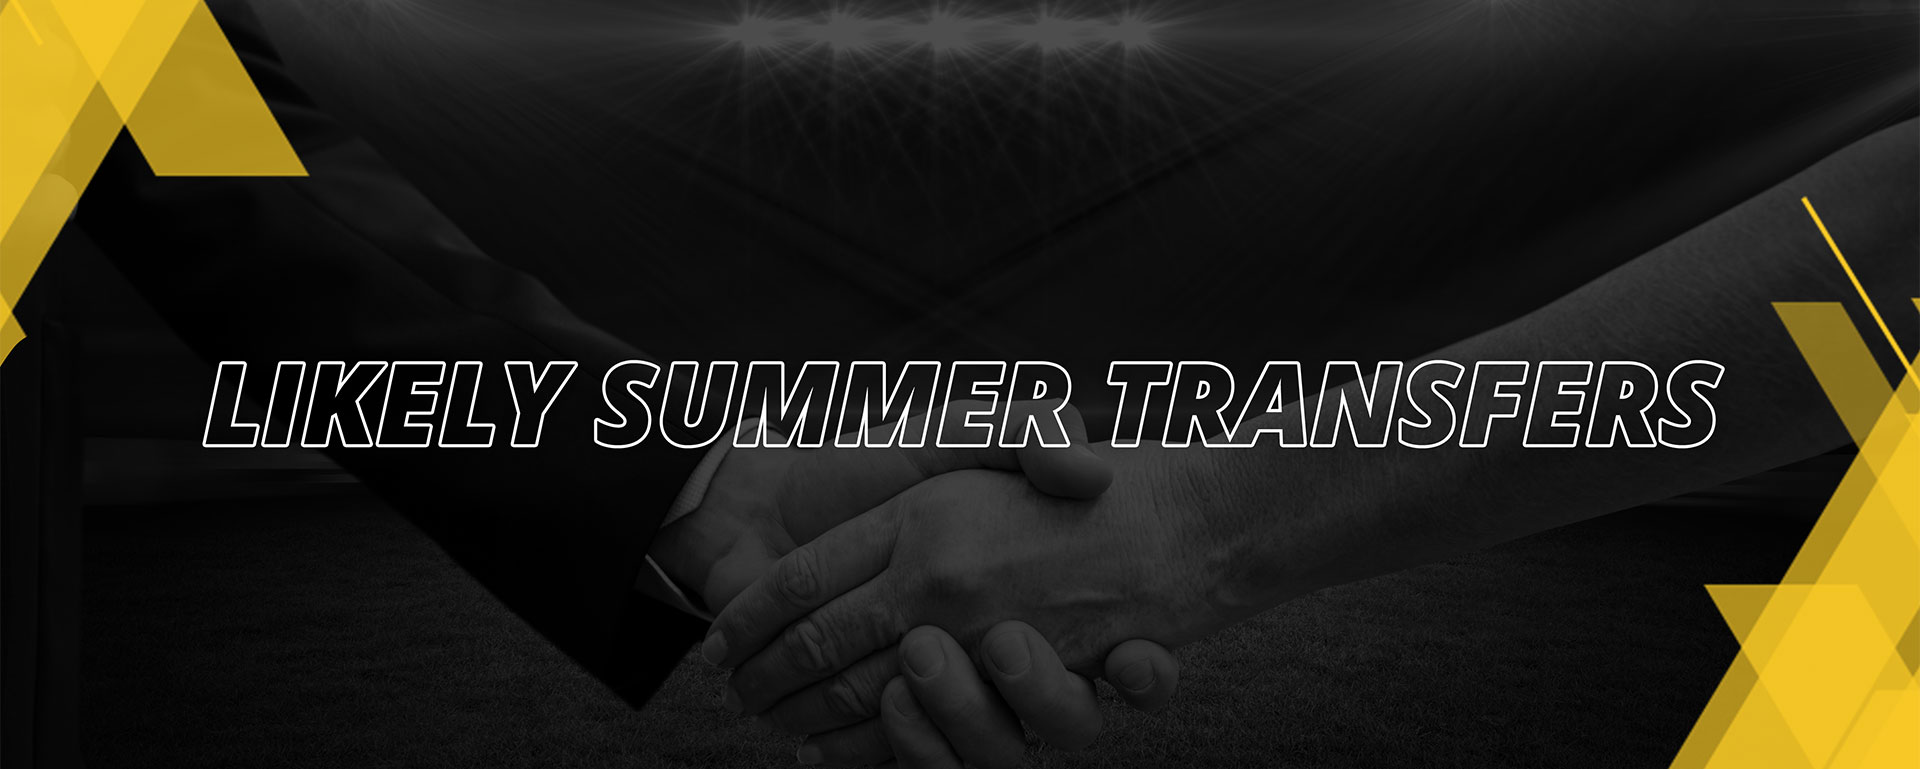 LIKELY SUMMER TRANSFERS